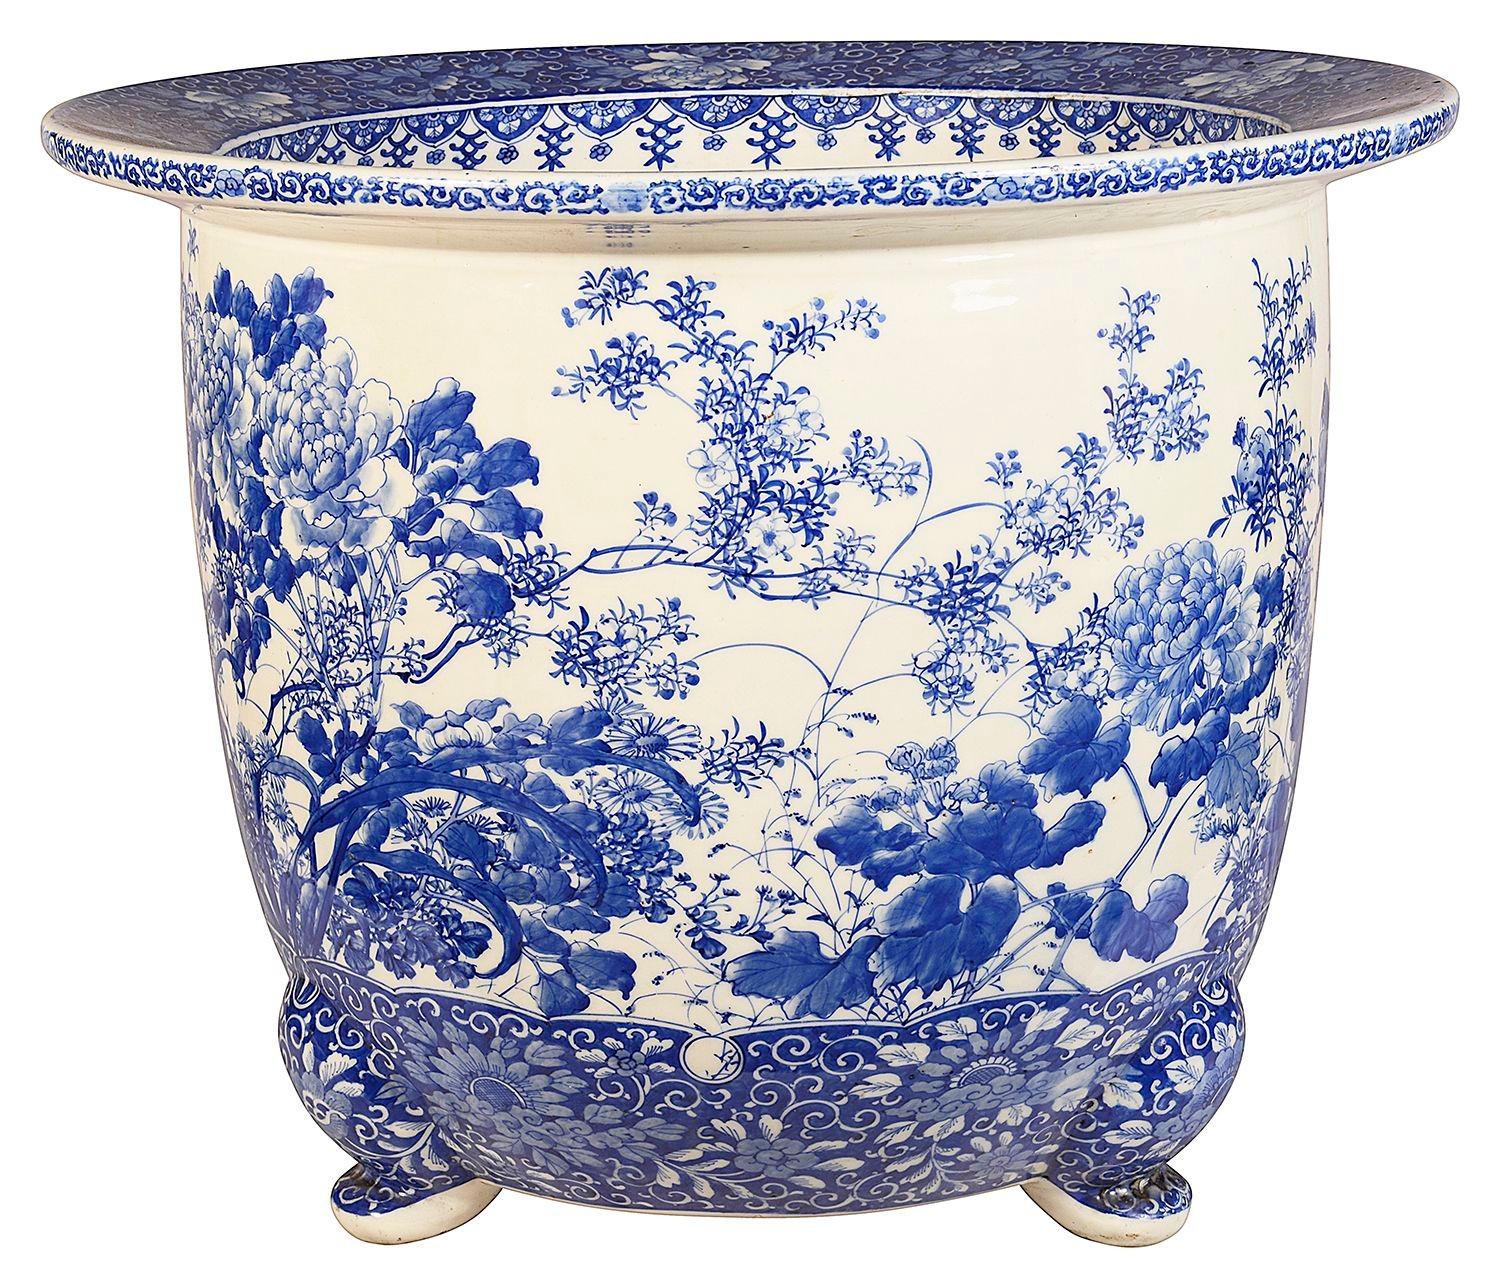 A large Japanese Blue and White porcelain jardiniere, having wonderful traditional motif decoration to the top and bottom. With hand painted exotic flowers and foliage around. Raised on three scrolling feet. Meiji period 1868-1912.


Batch 73 C/C